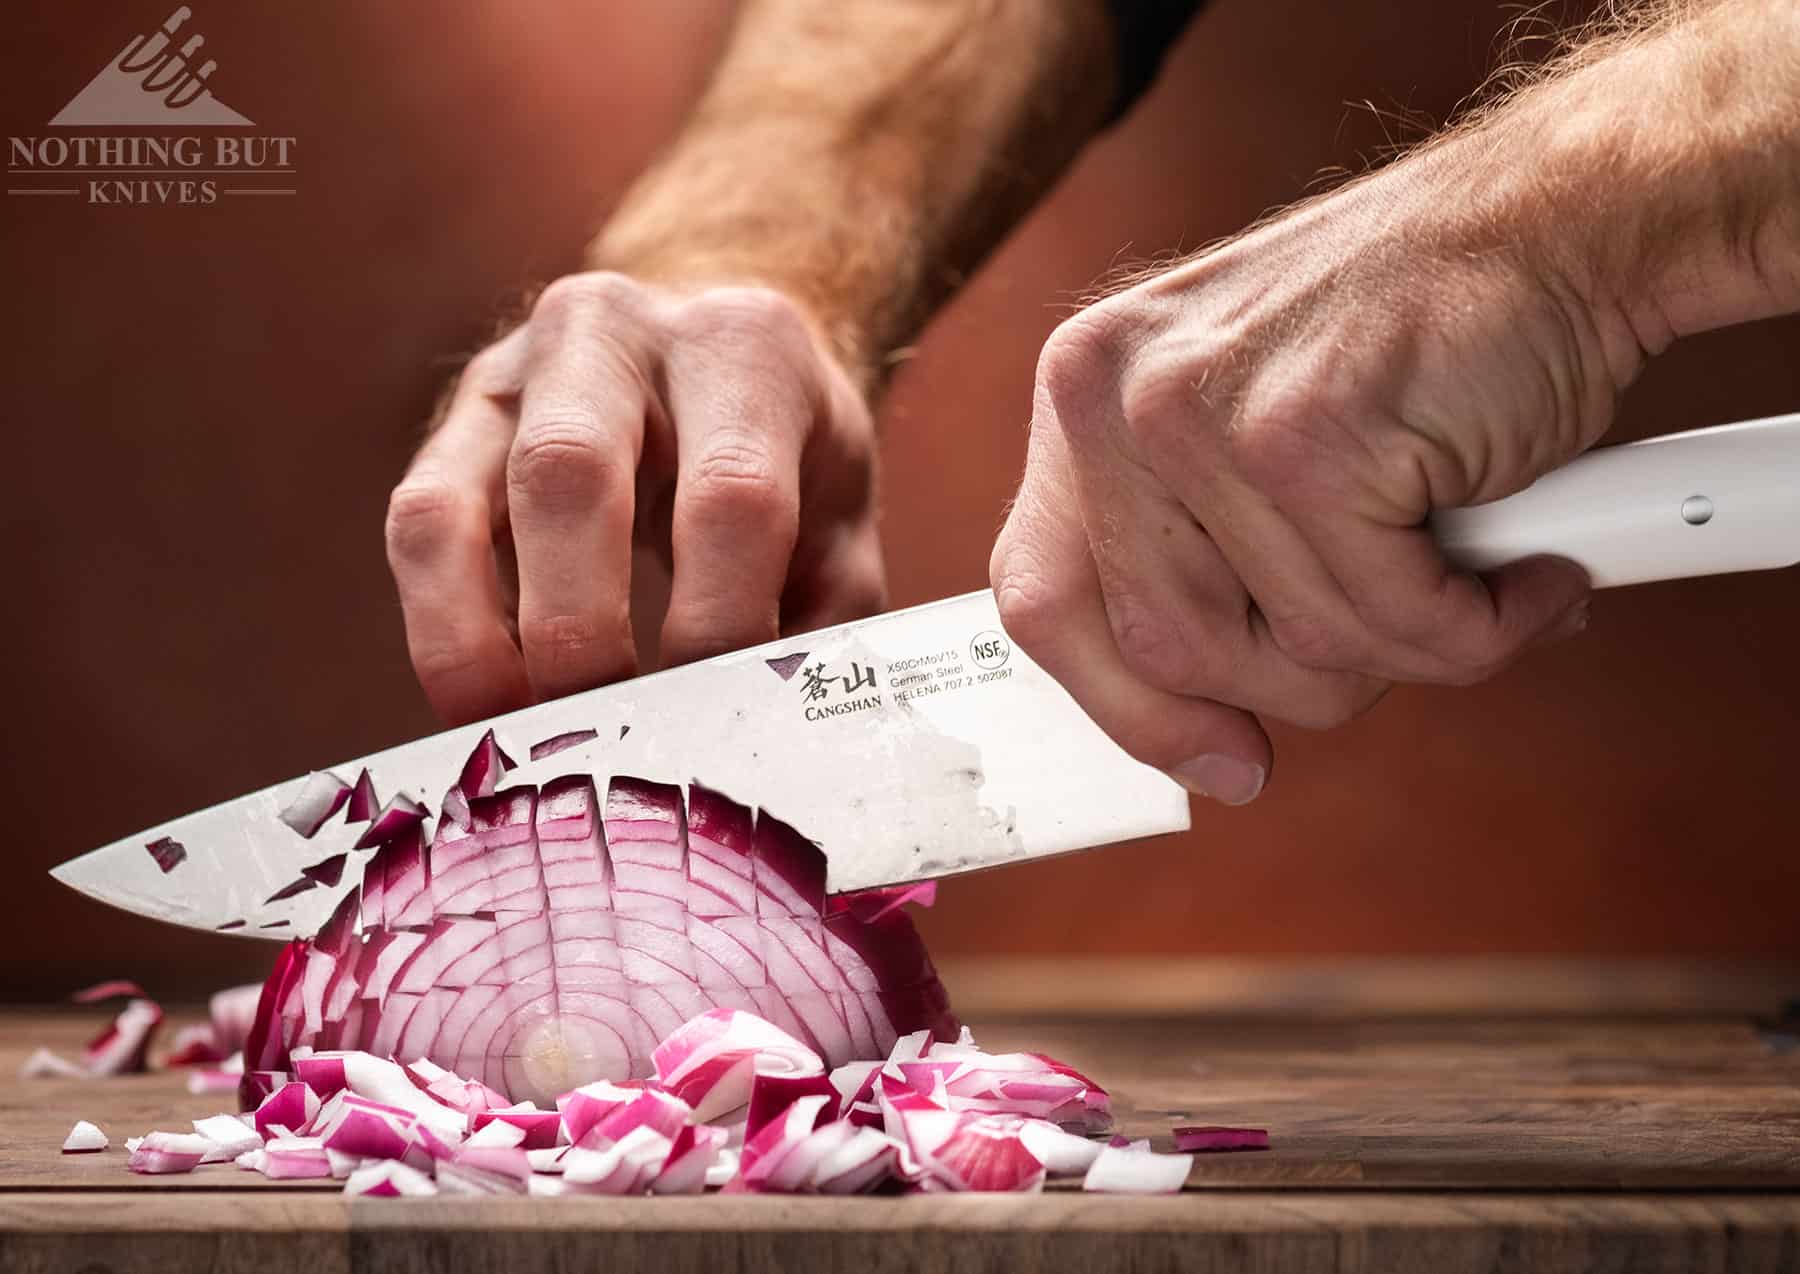 Dicing an onion with the impressive Cangshan Helena 8-inch chef knife. Its performance is one of the main reasons we chose this set as one of the best under $200.